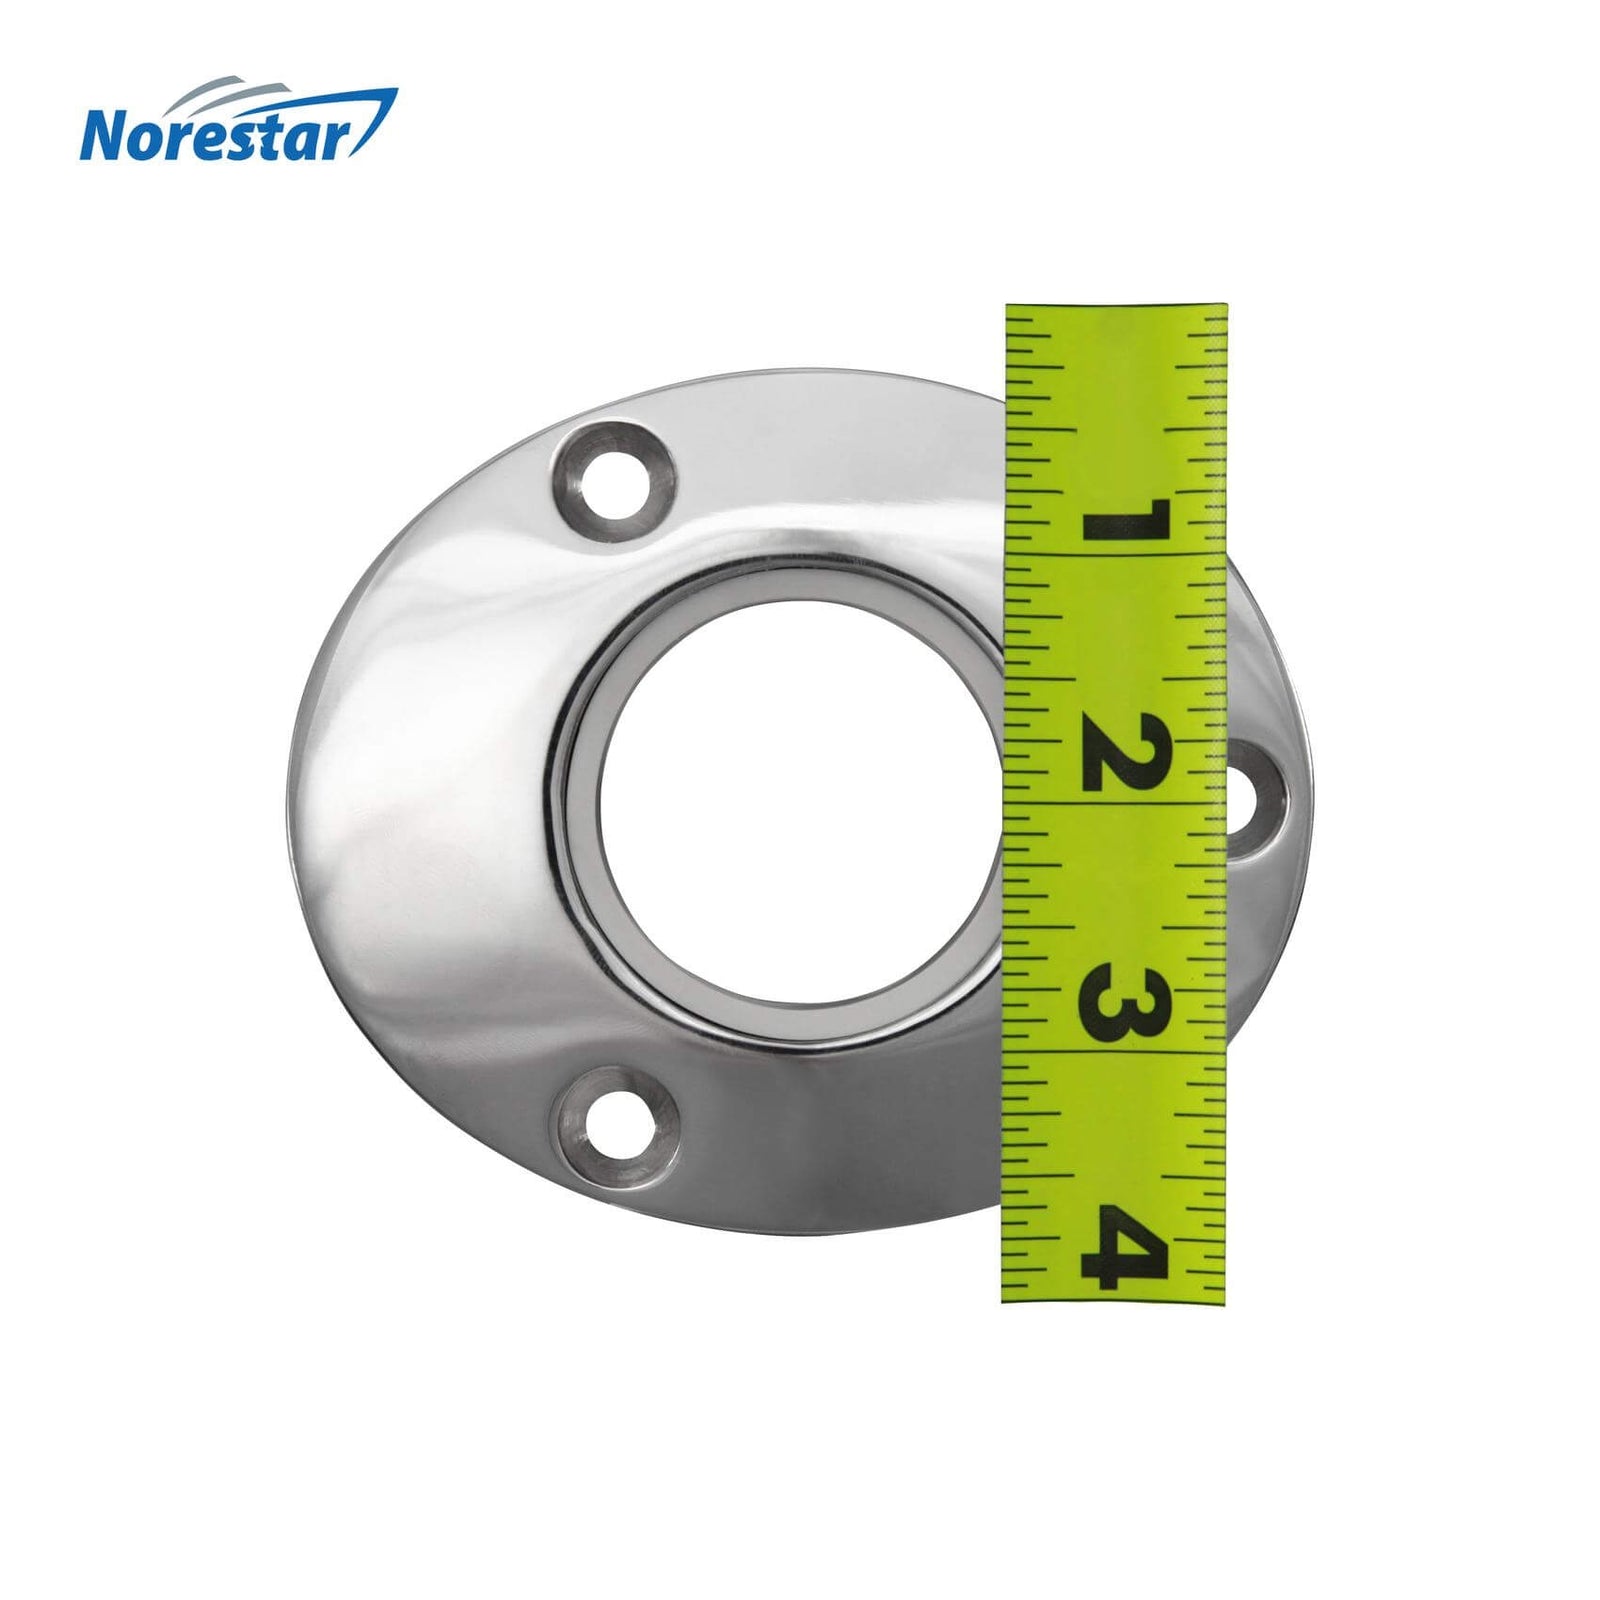 Norestar Two Flush Mounted Stainless Steel Fishing Rod Holders